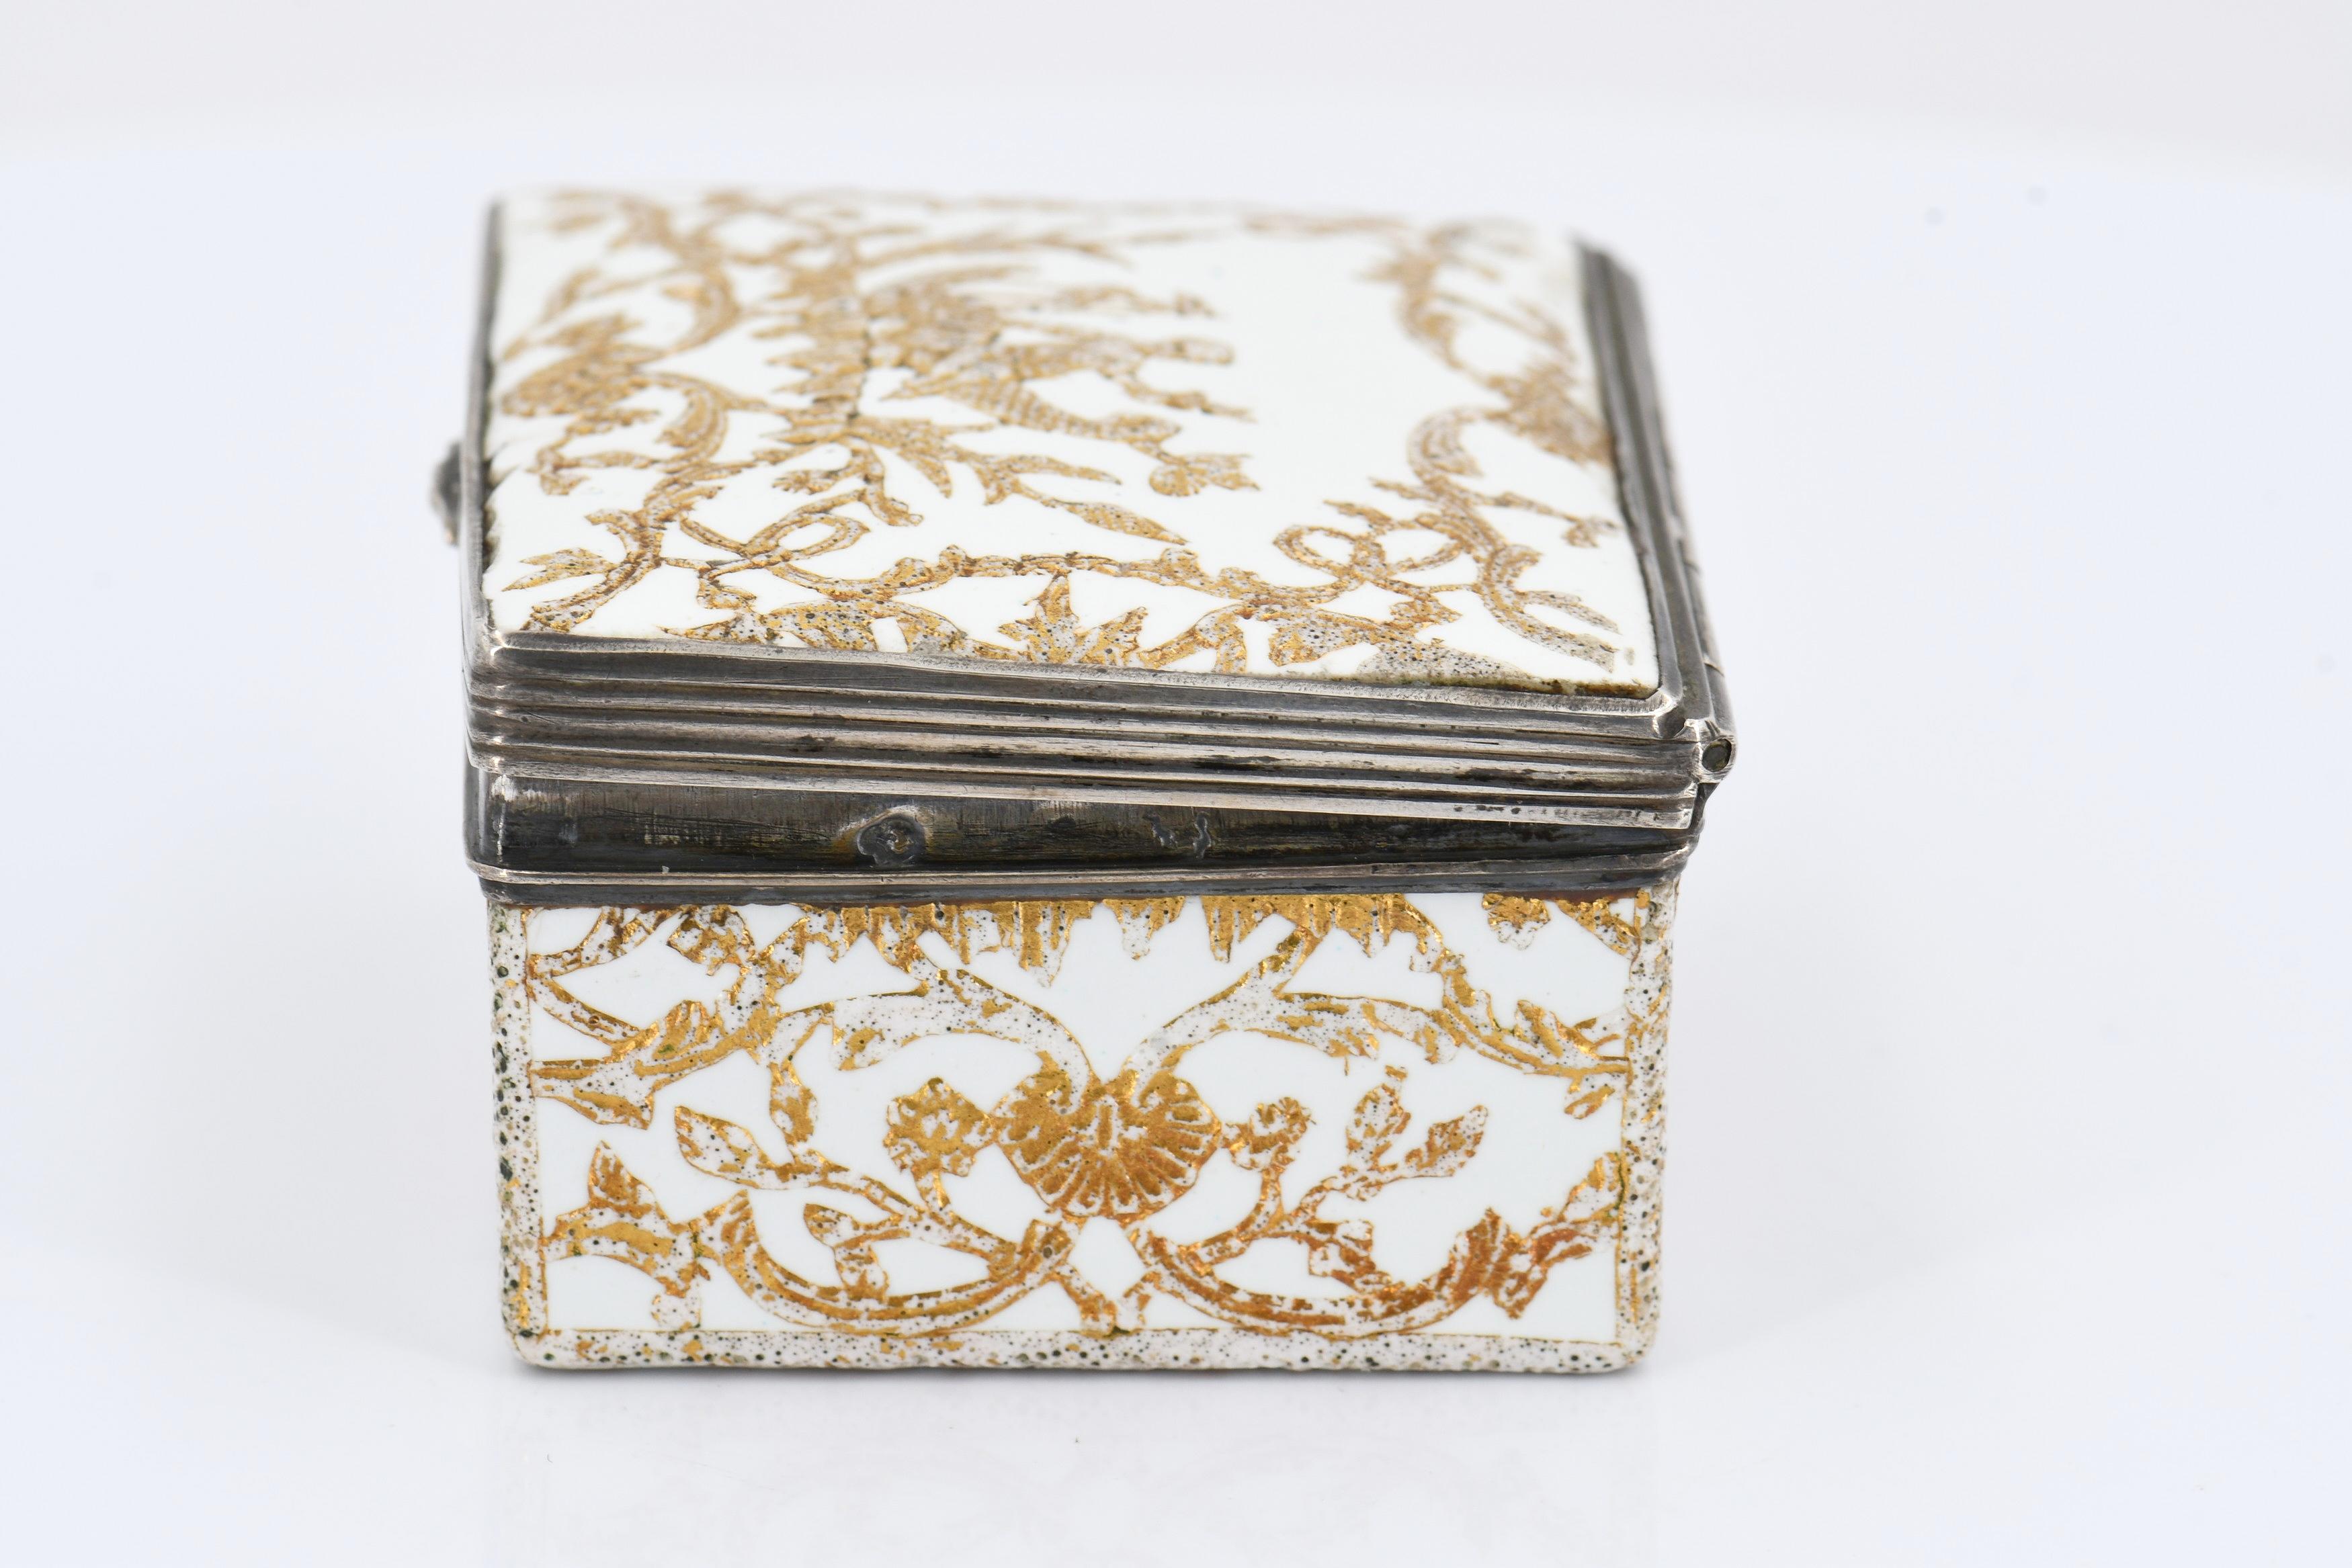 Snuff box with gold décor - Image 6 of 8